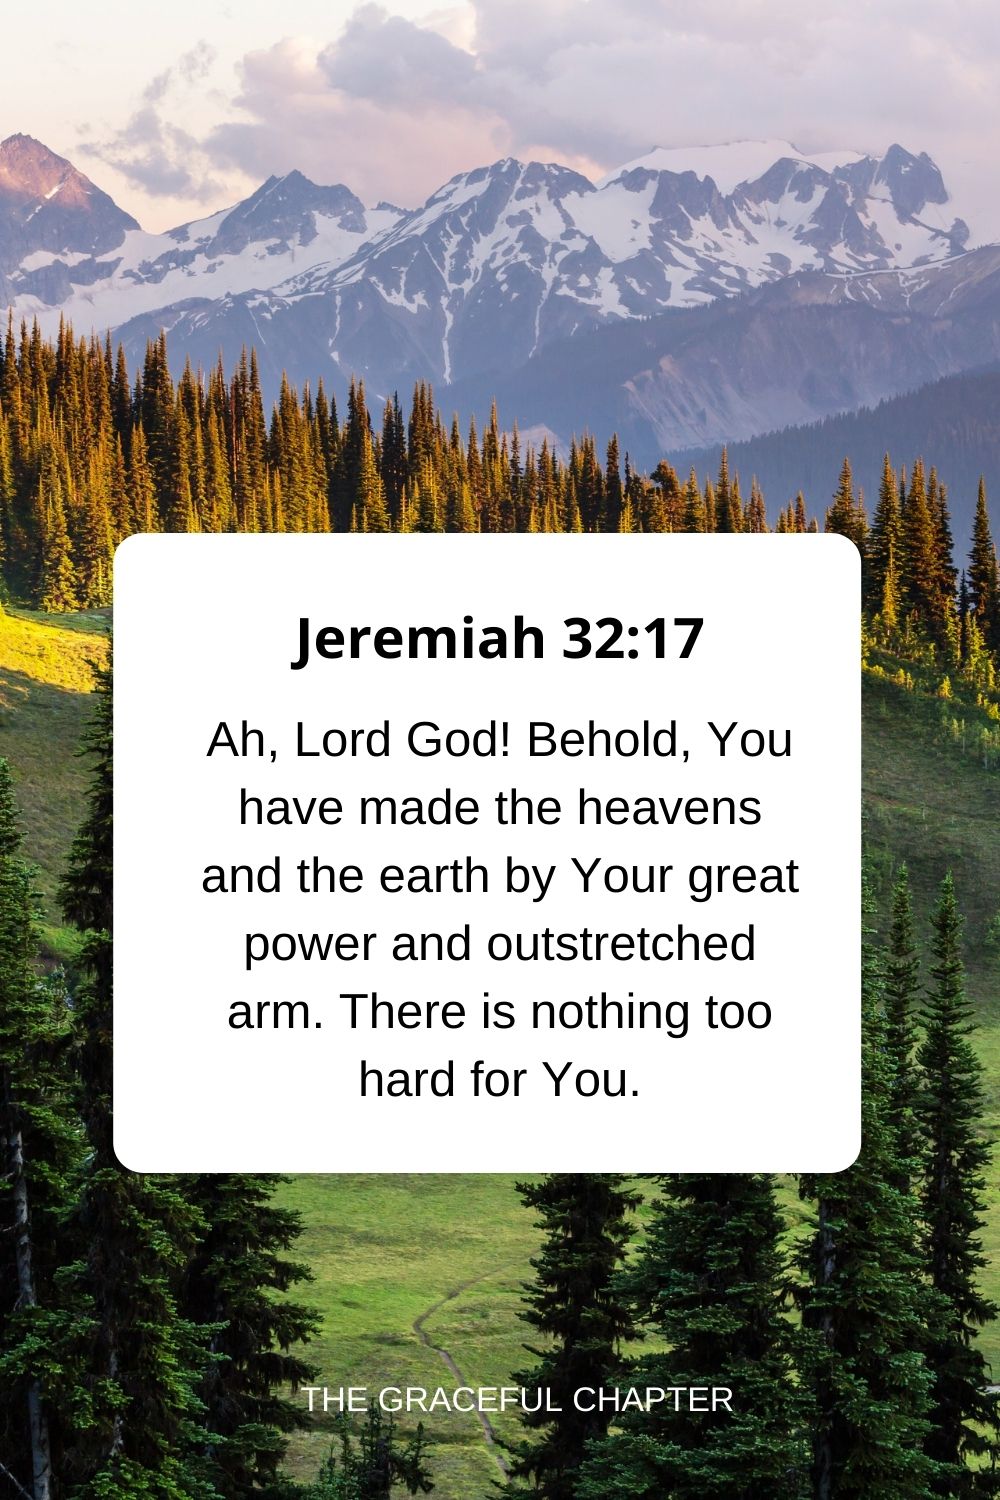 Ah, Lord God! Behold, You have made the heavens and the earth by Your great power and outstretched arm. There is nothing too hard for You. Jeremiah 32:17